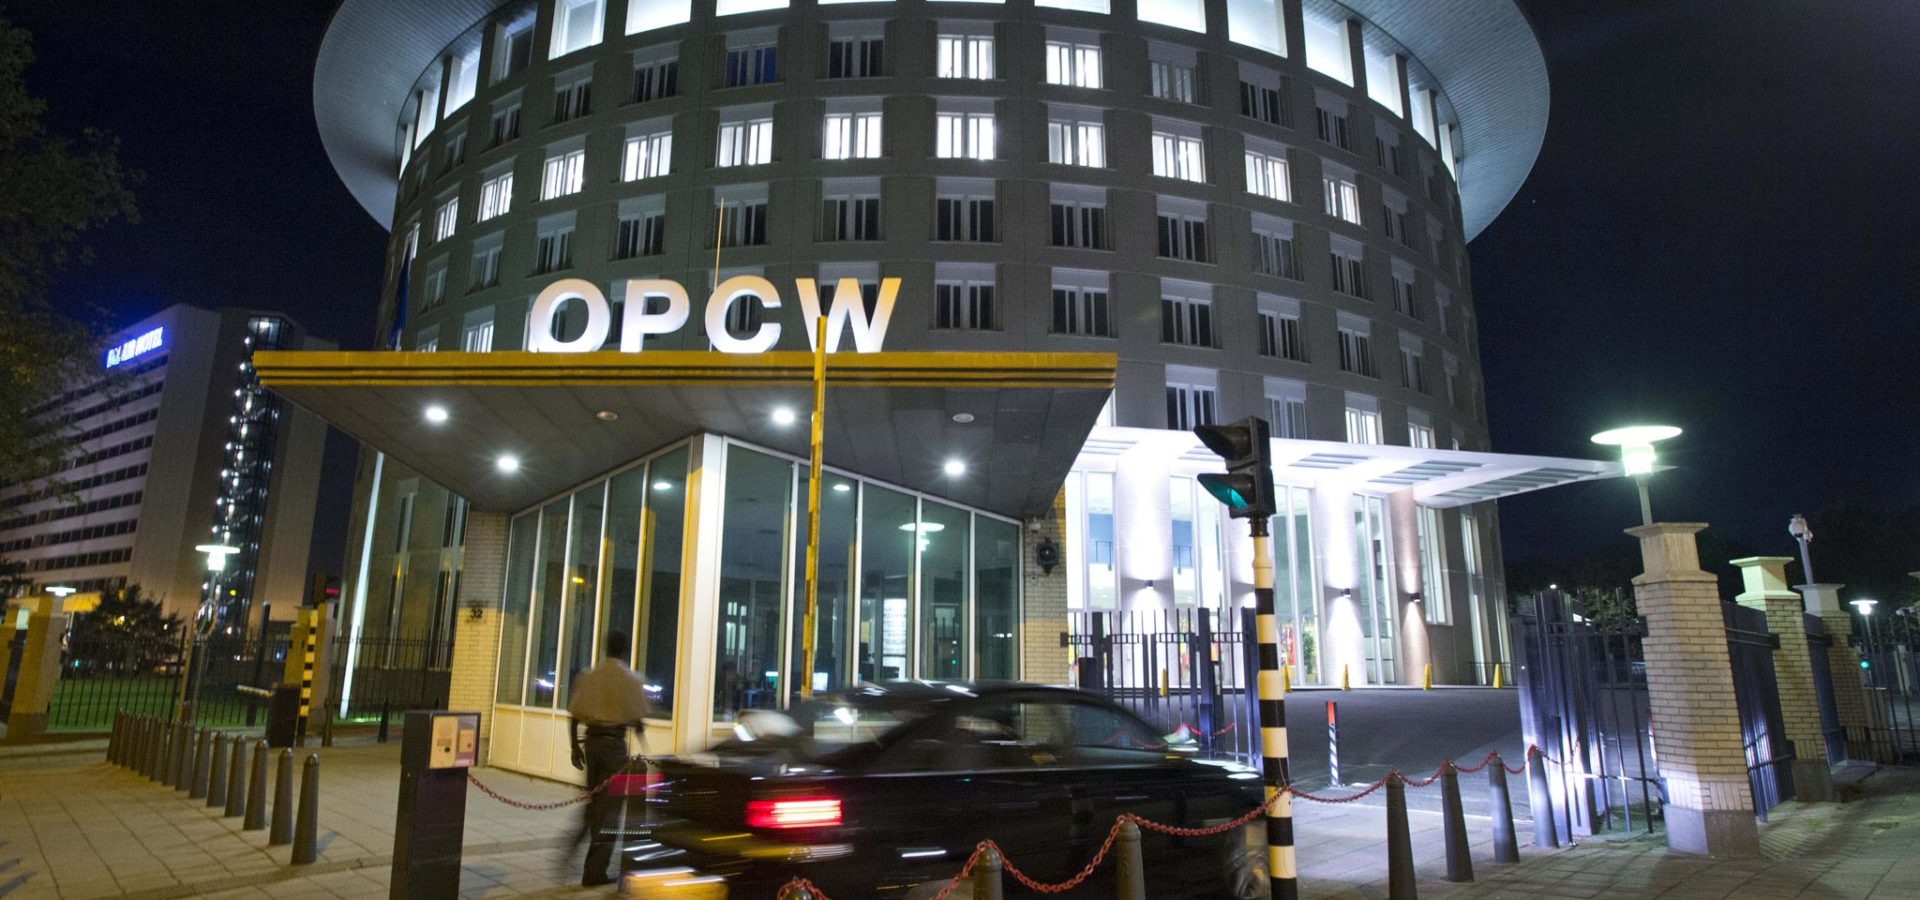 Headquarters of the Organization for the Prohibition of Chemical Weapons, OPCW, in The Hague, Netherlands. (AP/Peter Dejong)